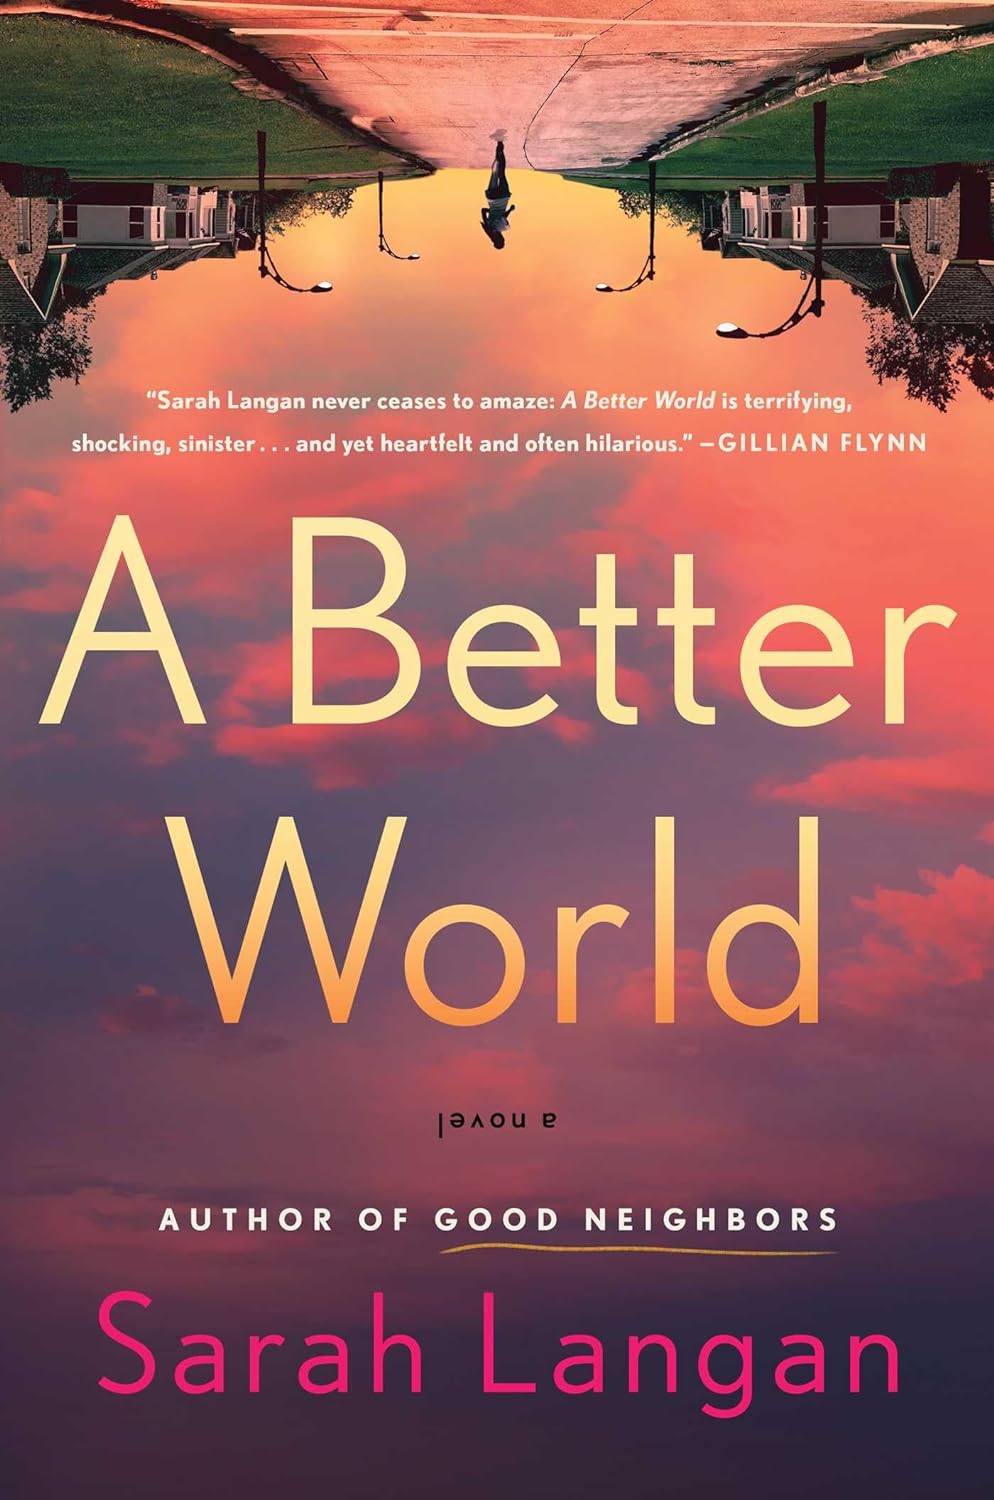 Image for "A Better World"